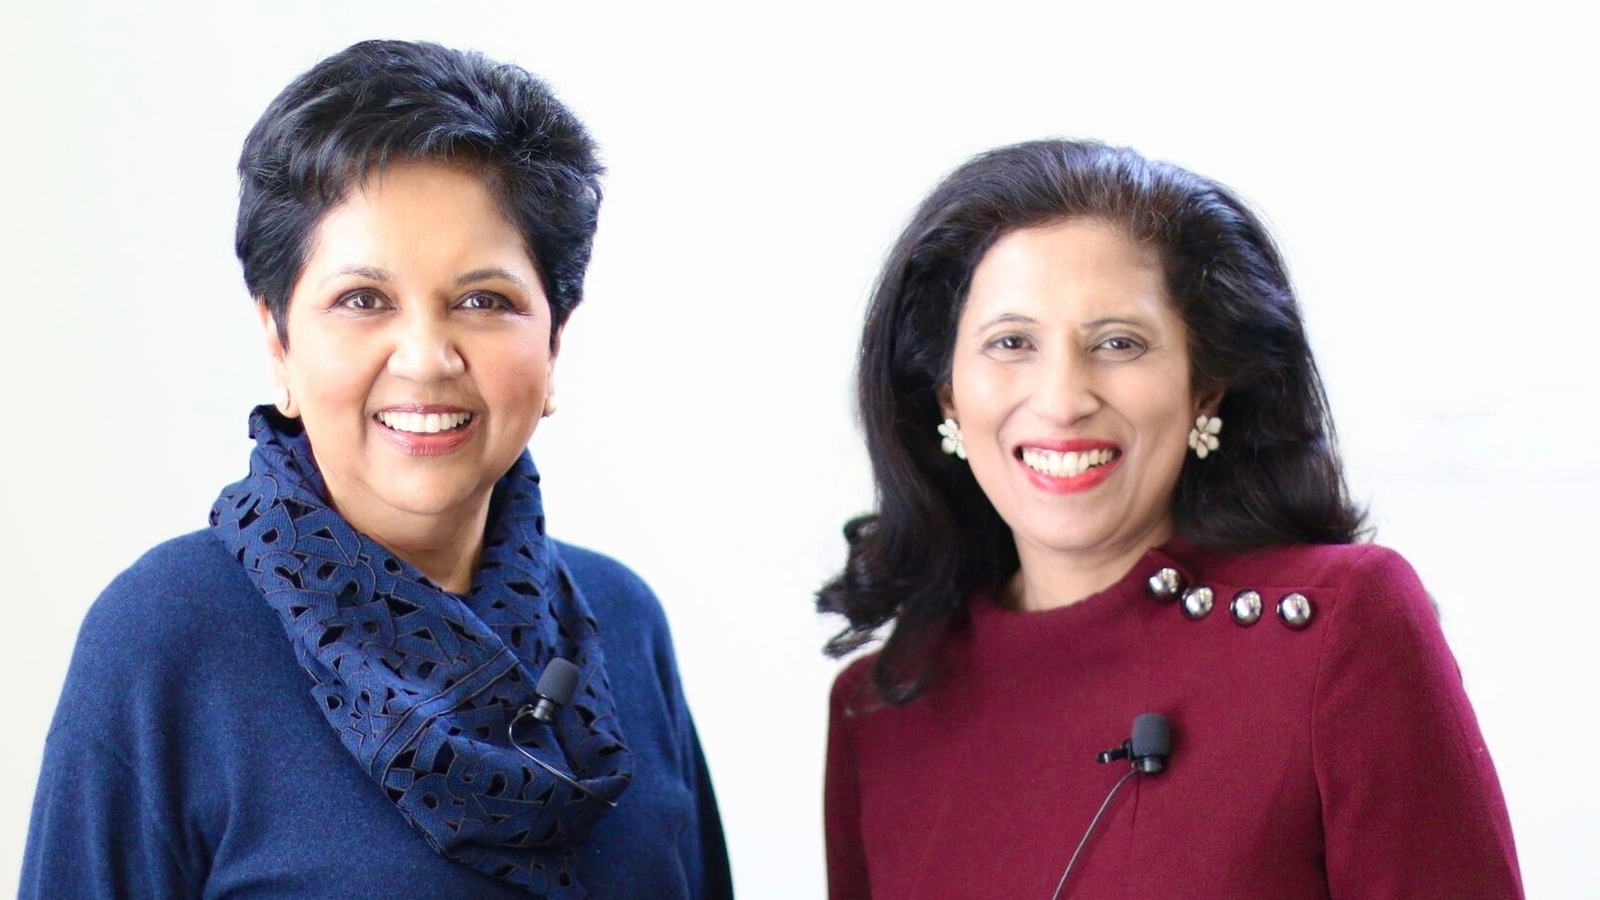 An honour seeing you rise': Indra Nooyi congratulates Leena Nair on  becoming Chanel's CEO - Hindustan Times